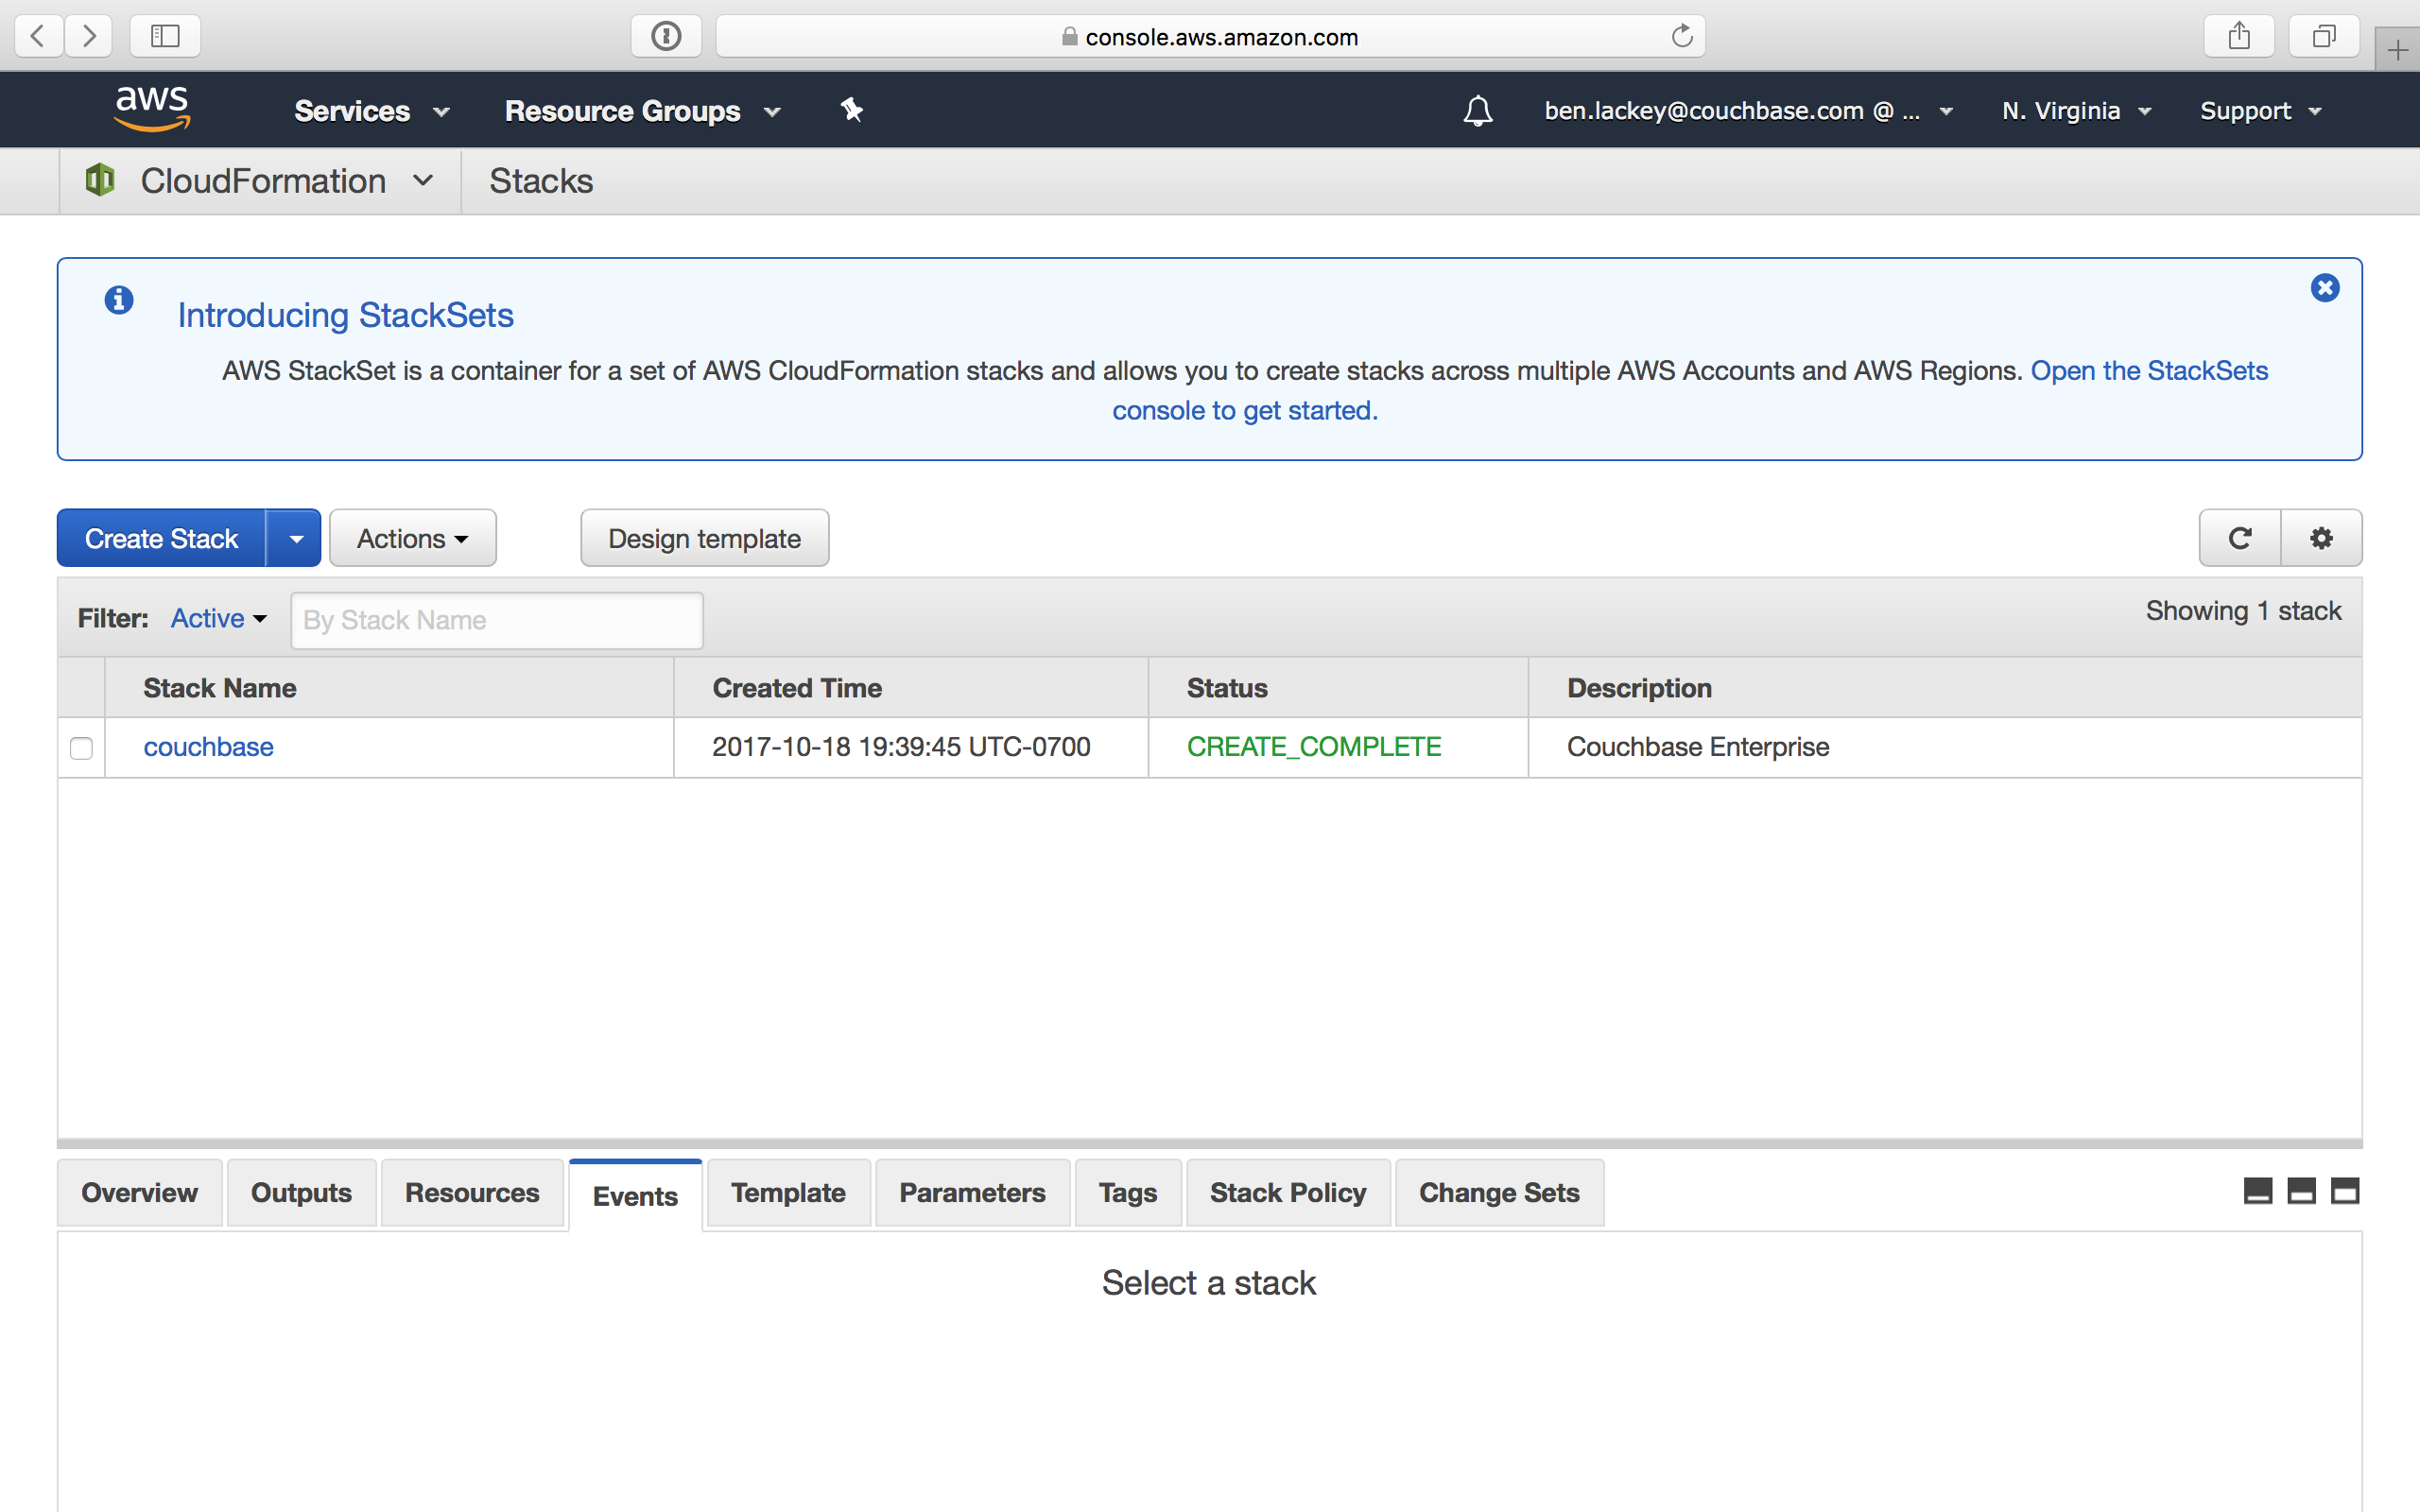 aws marketplace couchbase ee create stack complete